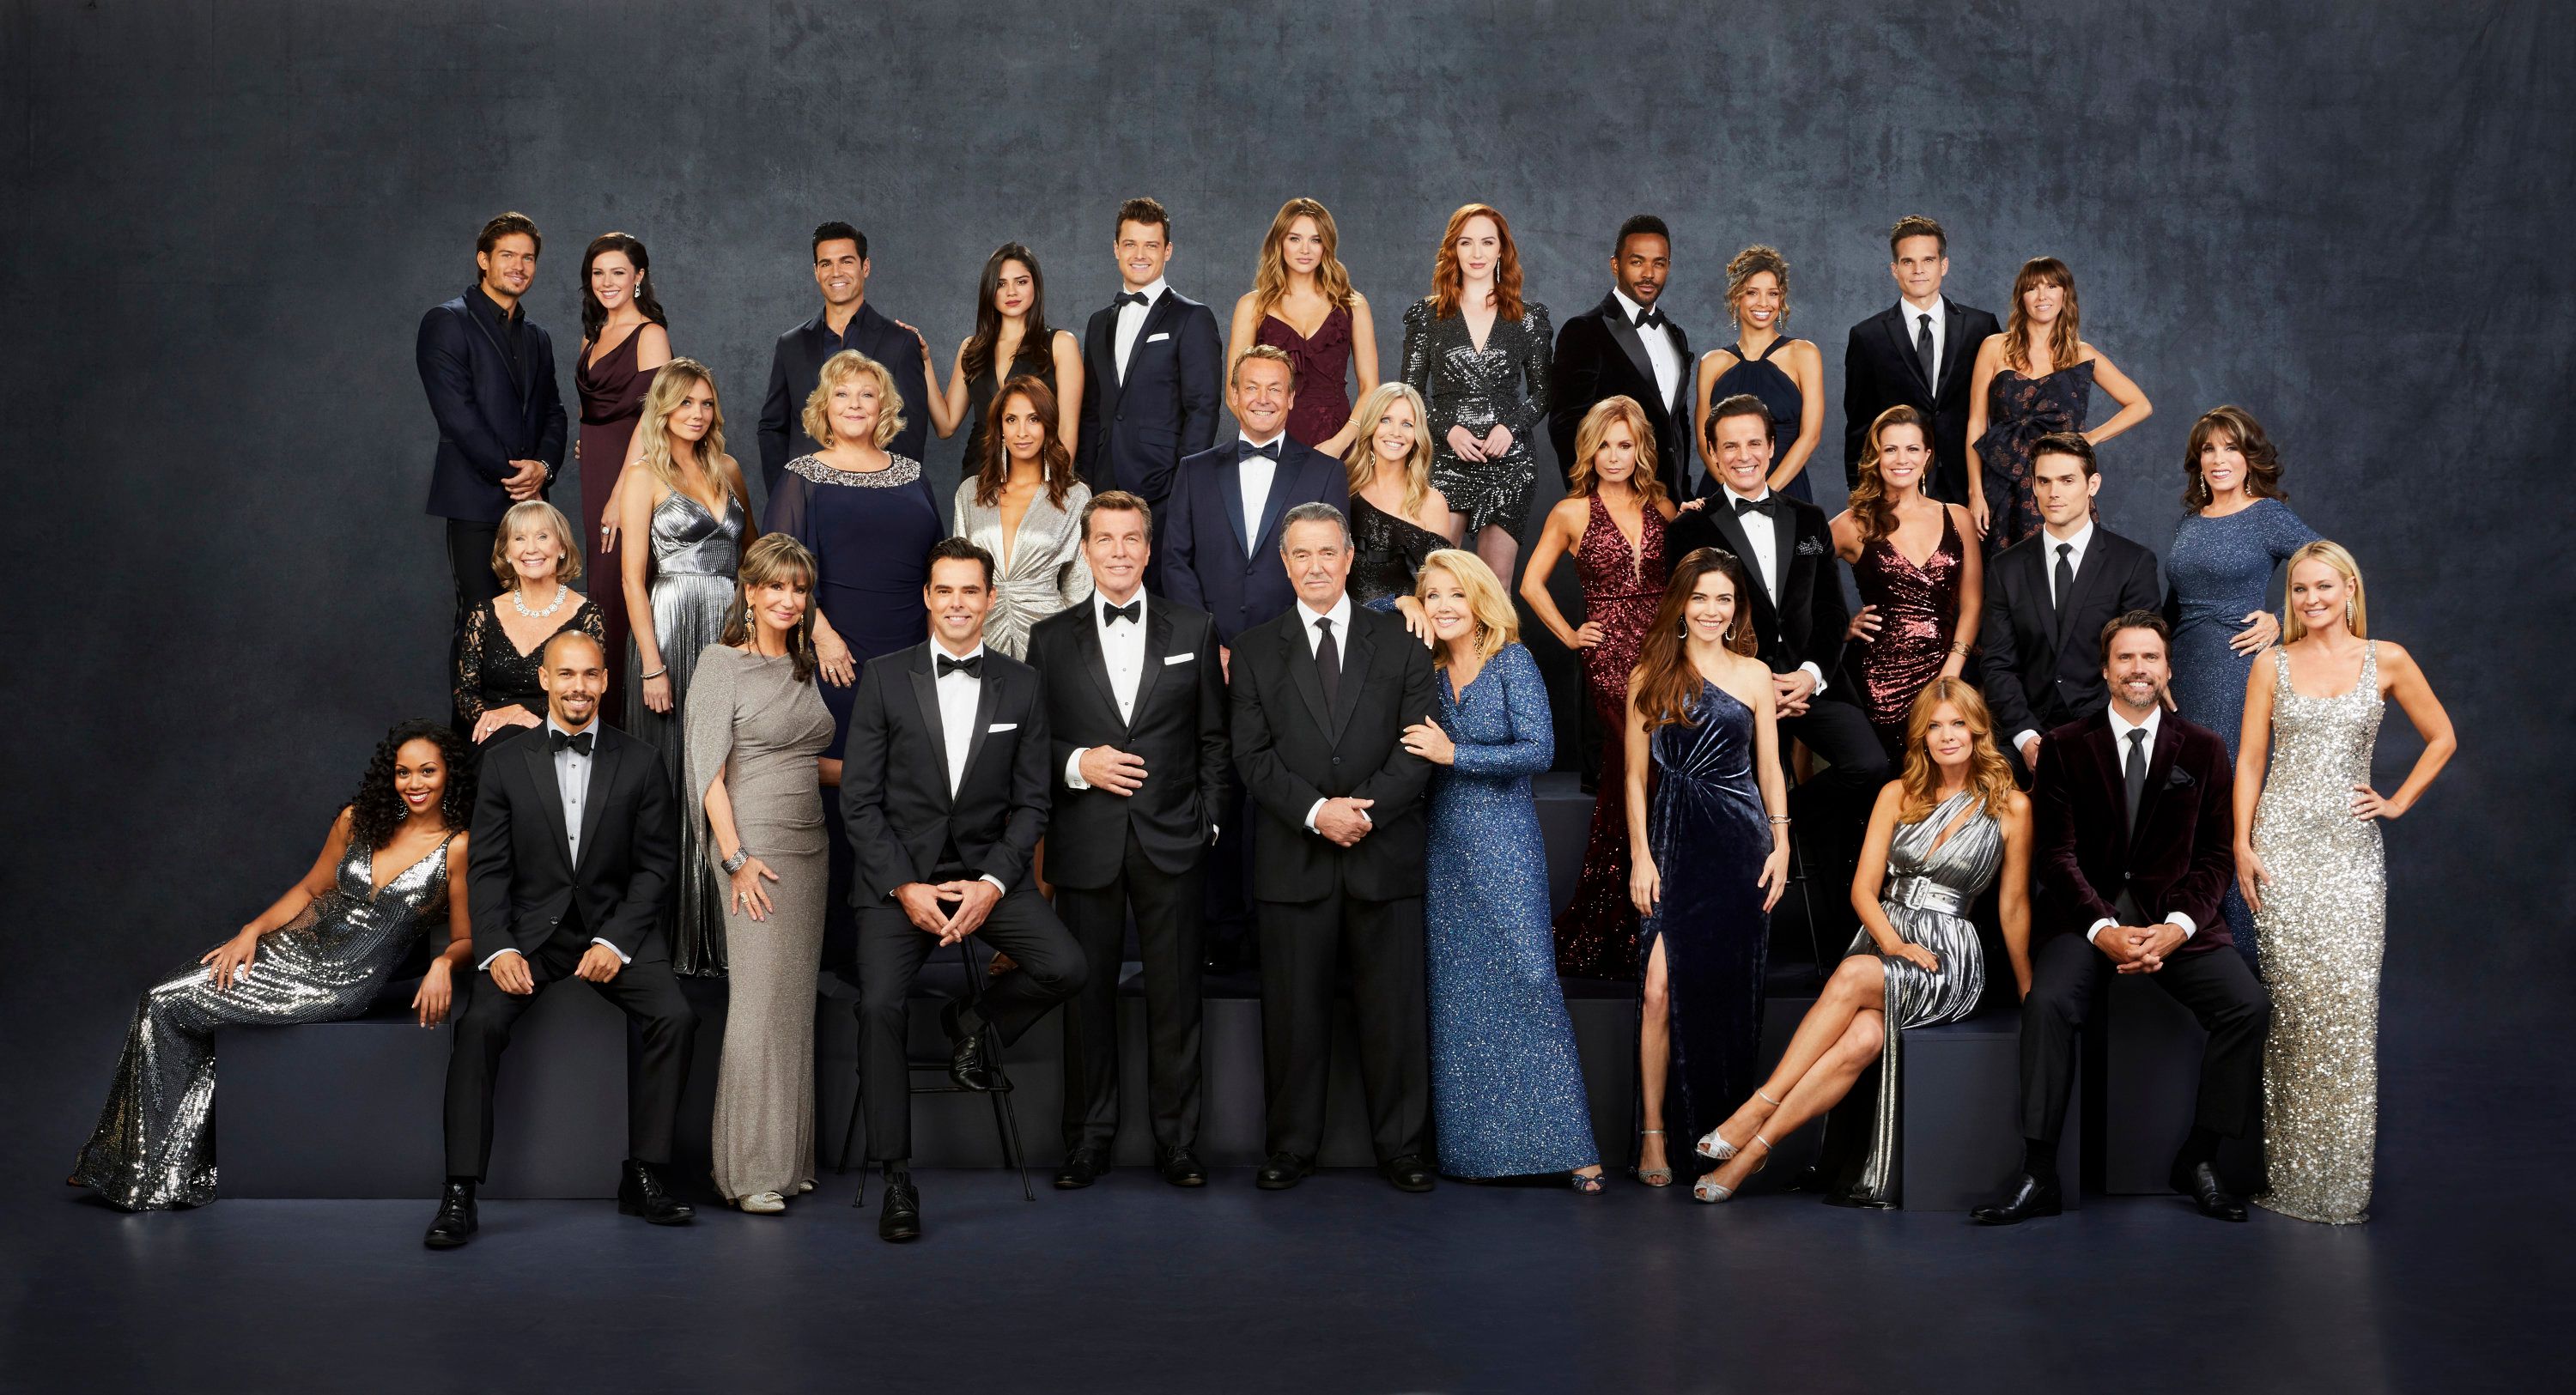 The cast of The Young and the Restless